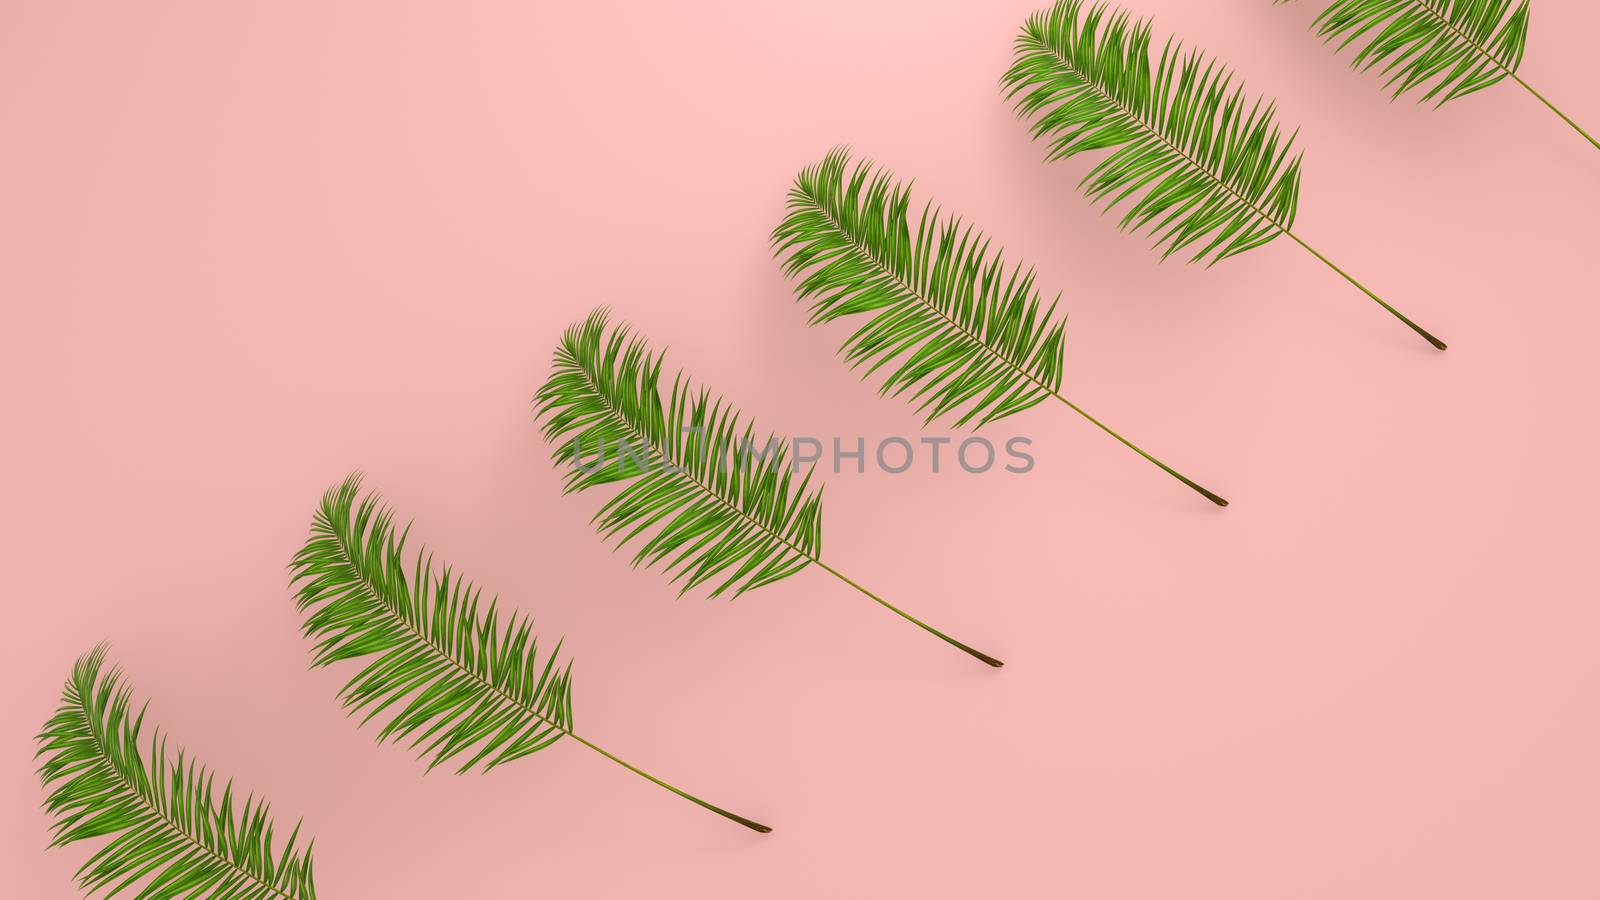 Realistic palm leaves on Coral Living background for cosmetic ad or fashion illustration. Tropical frame exotic banana palm. Sale banner design. 3D render by Shanvood